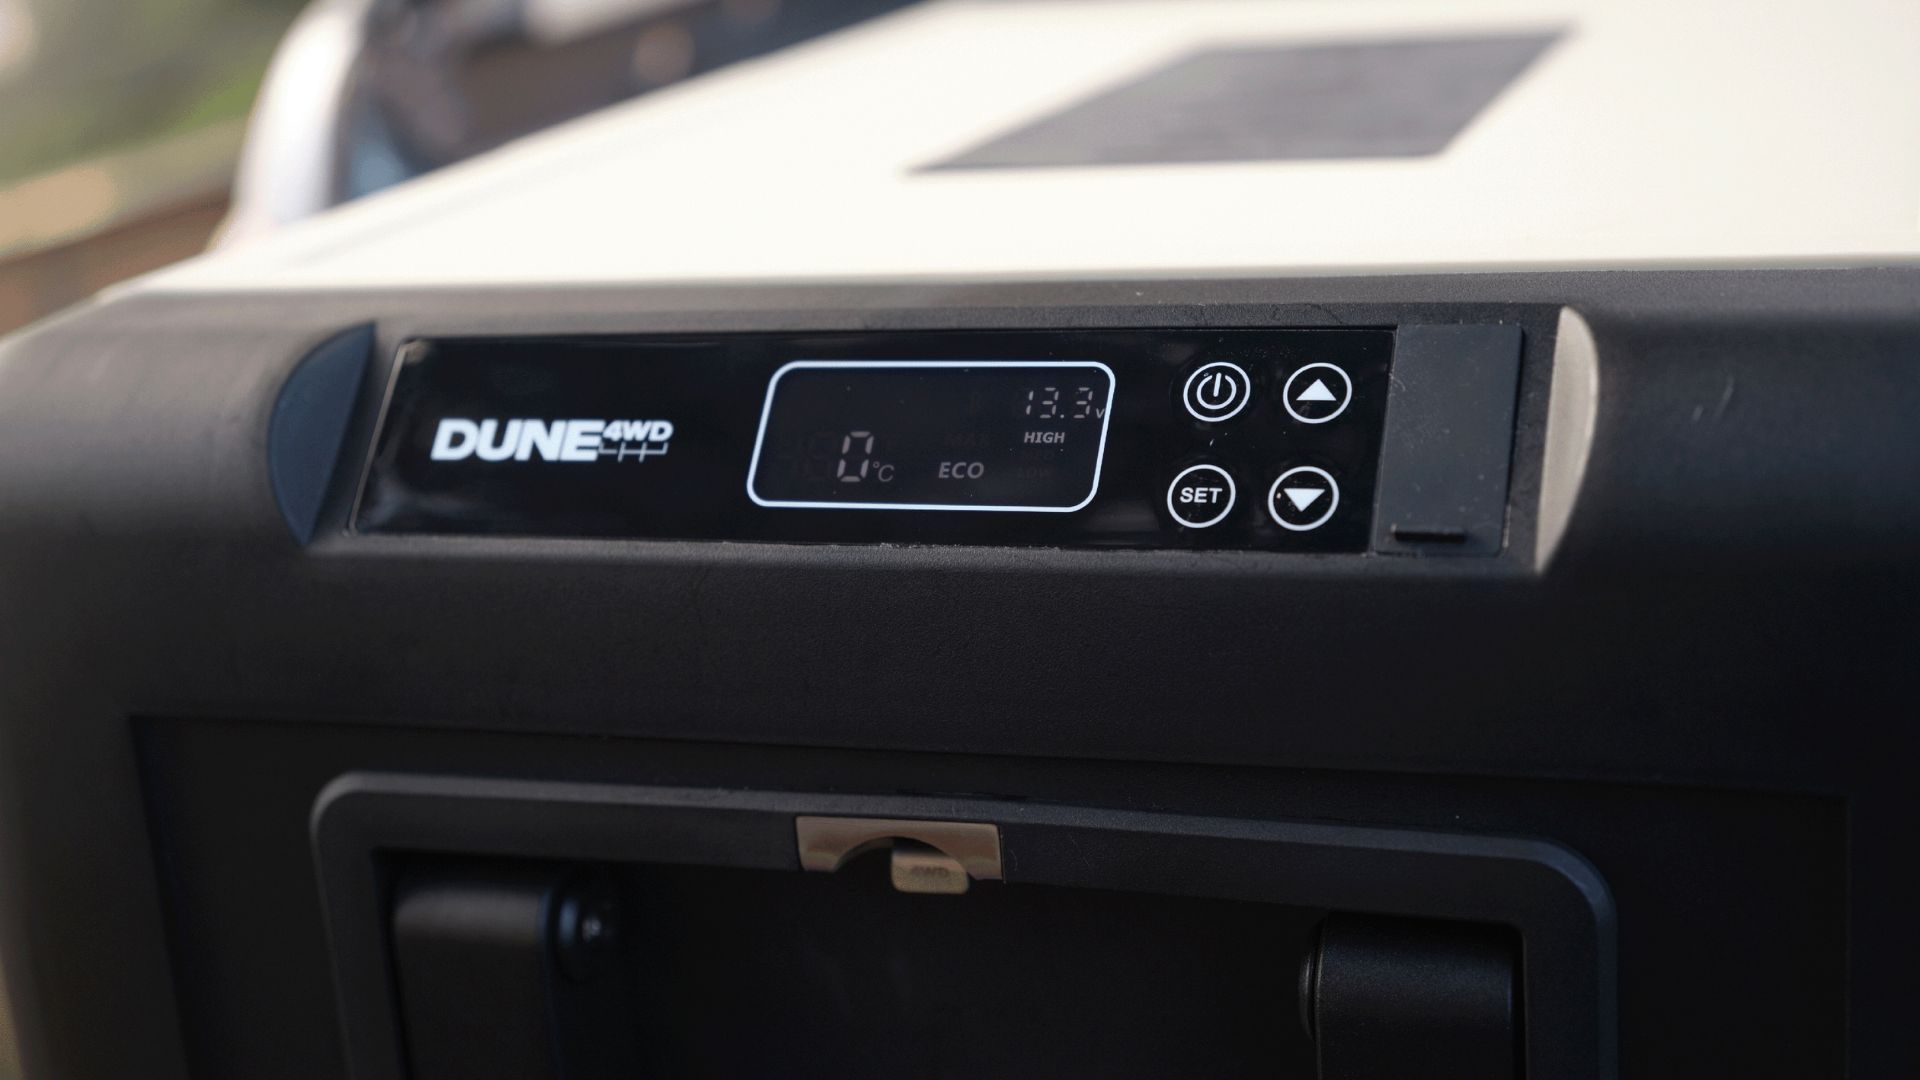 The Dune 4WD 75L Fridge/Freezer can cool to negative 22 degrees Celcius